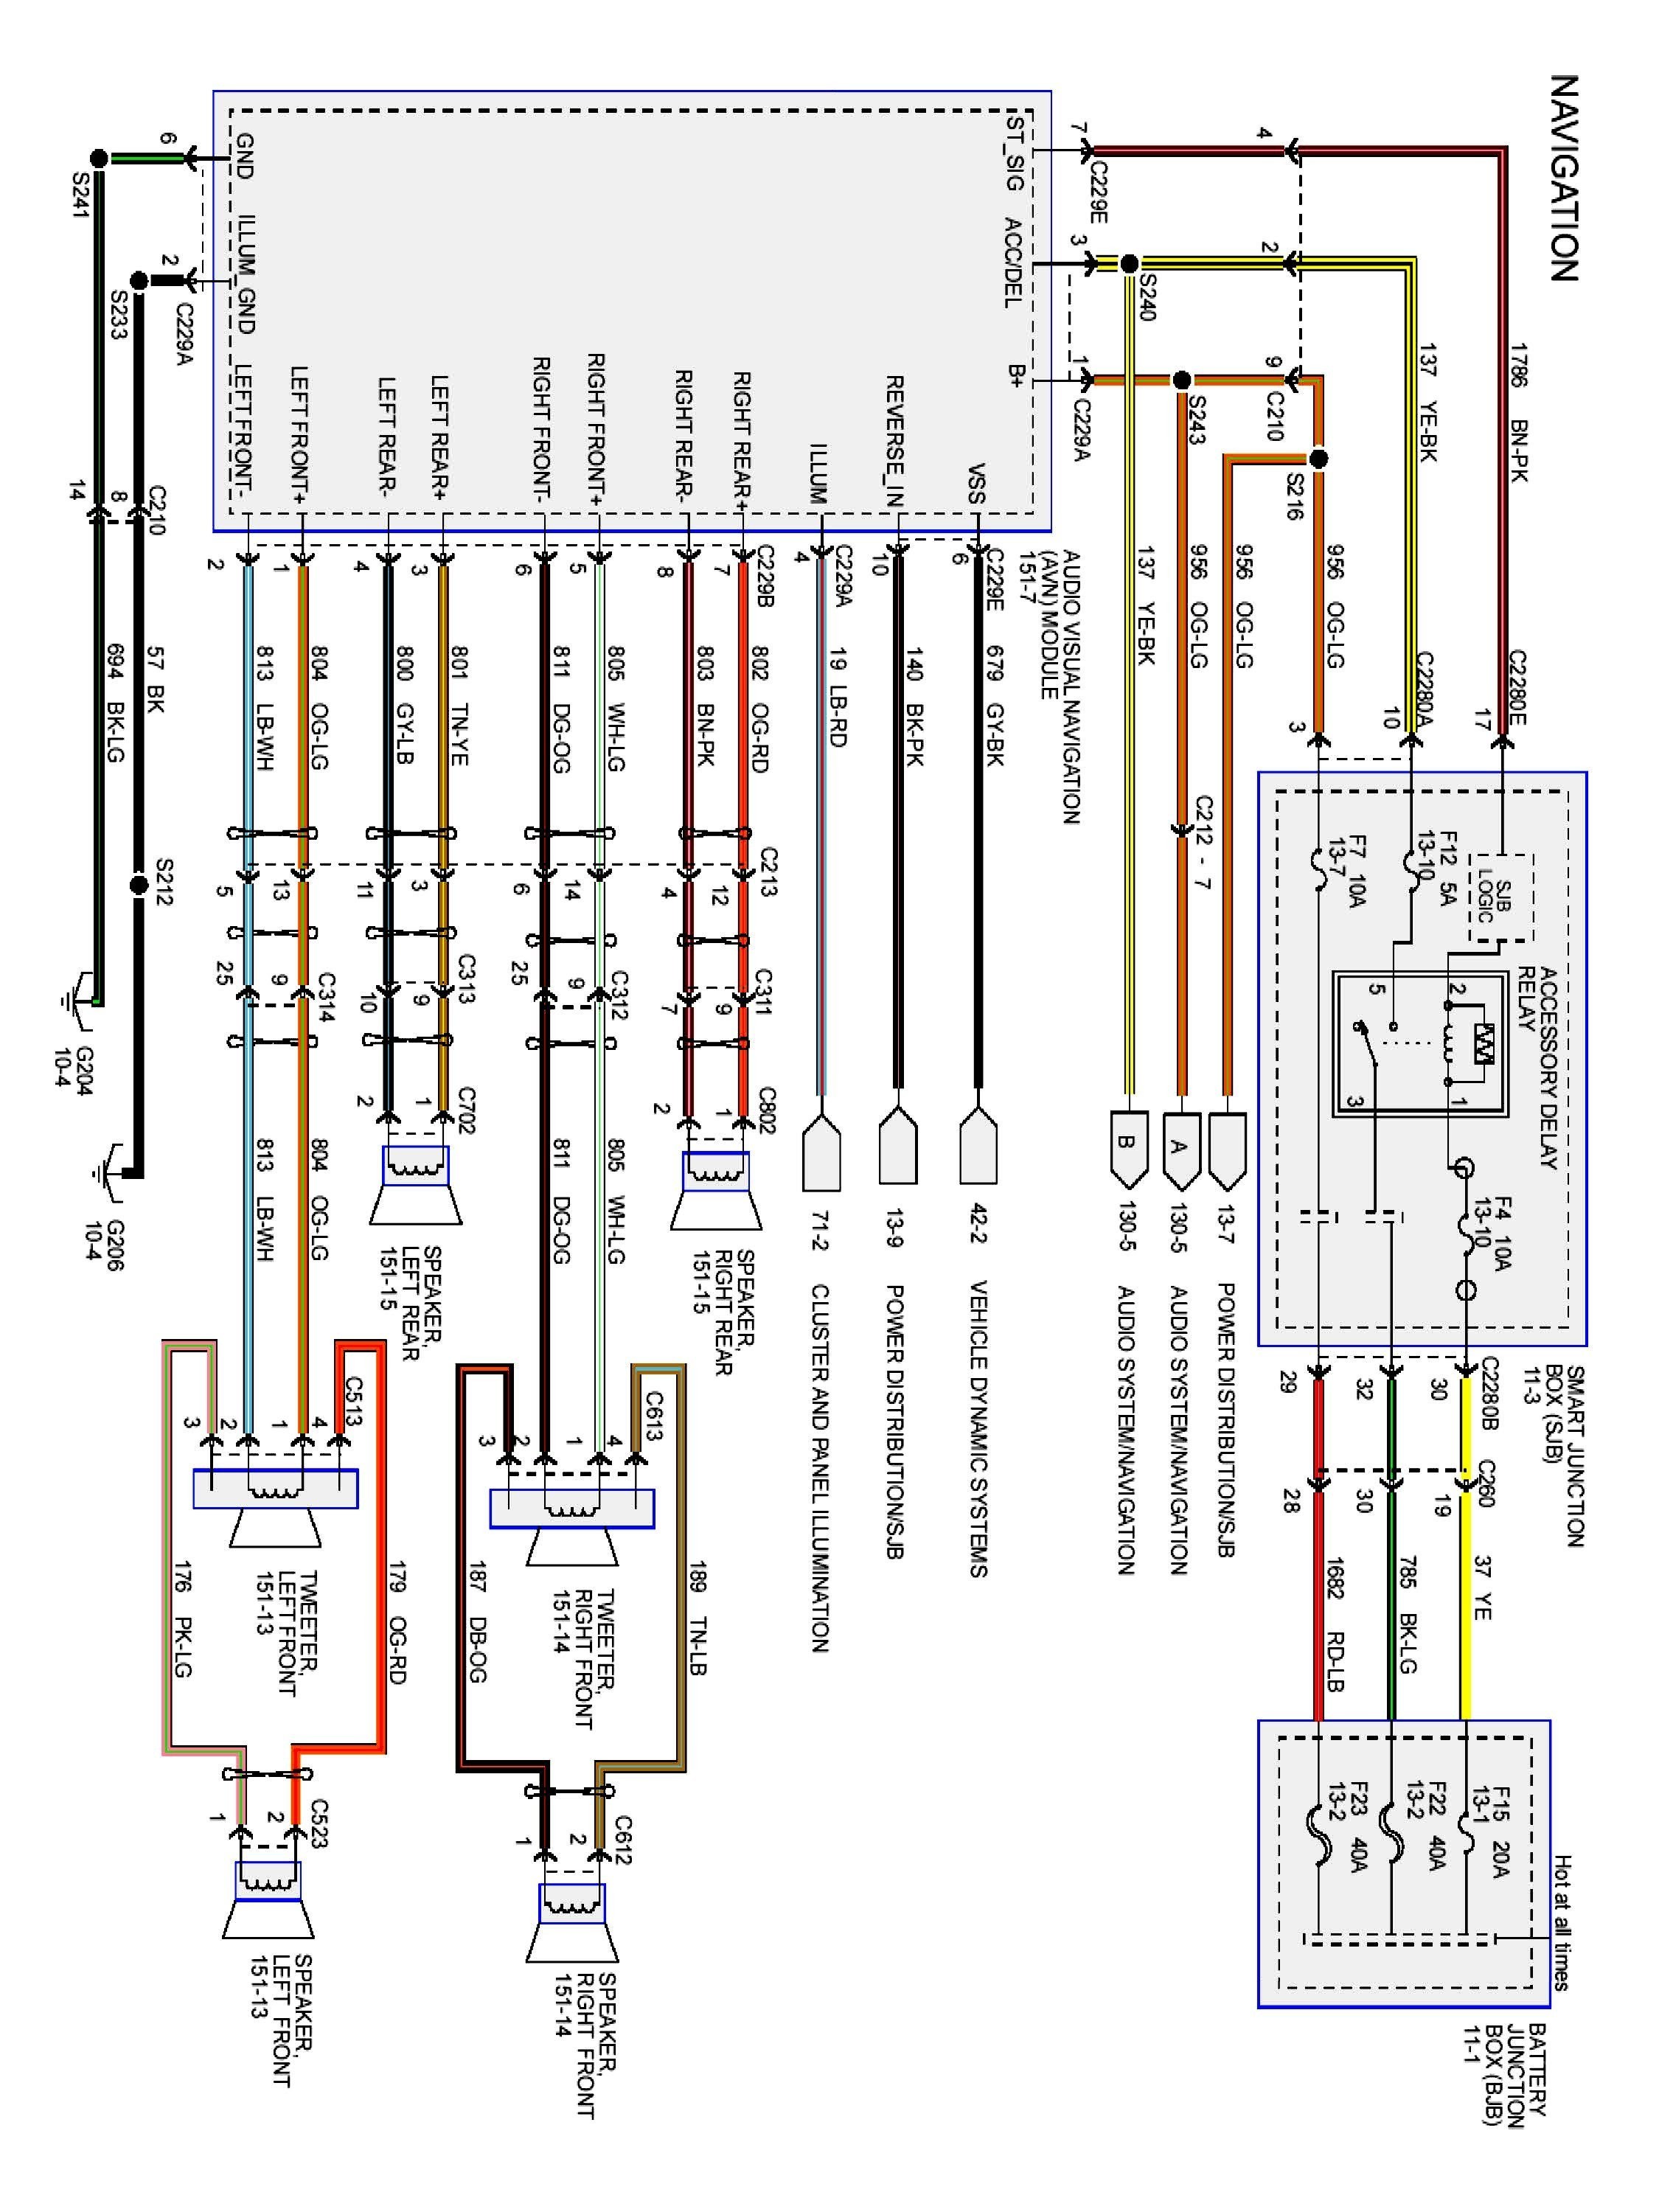 2006 Ford Fusion Stereo Wiring Diagram from detoxicrecenze.com